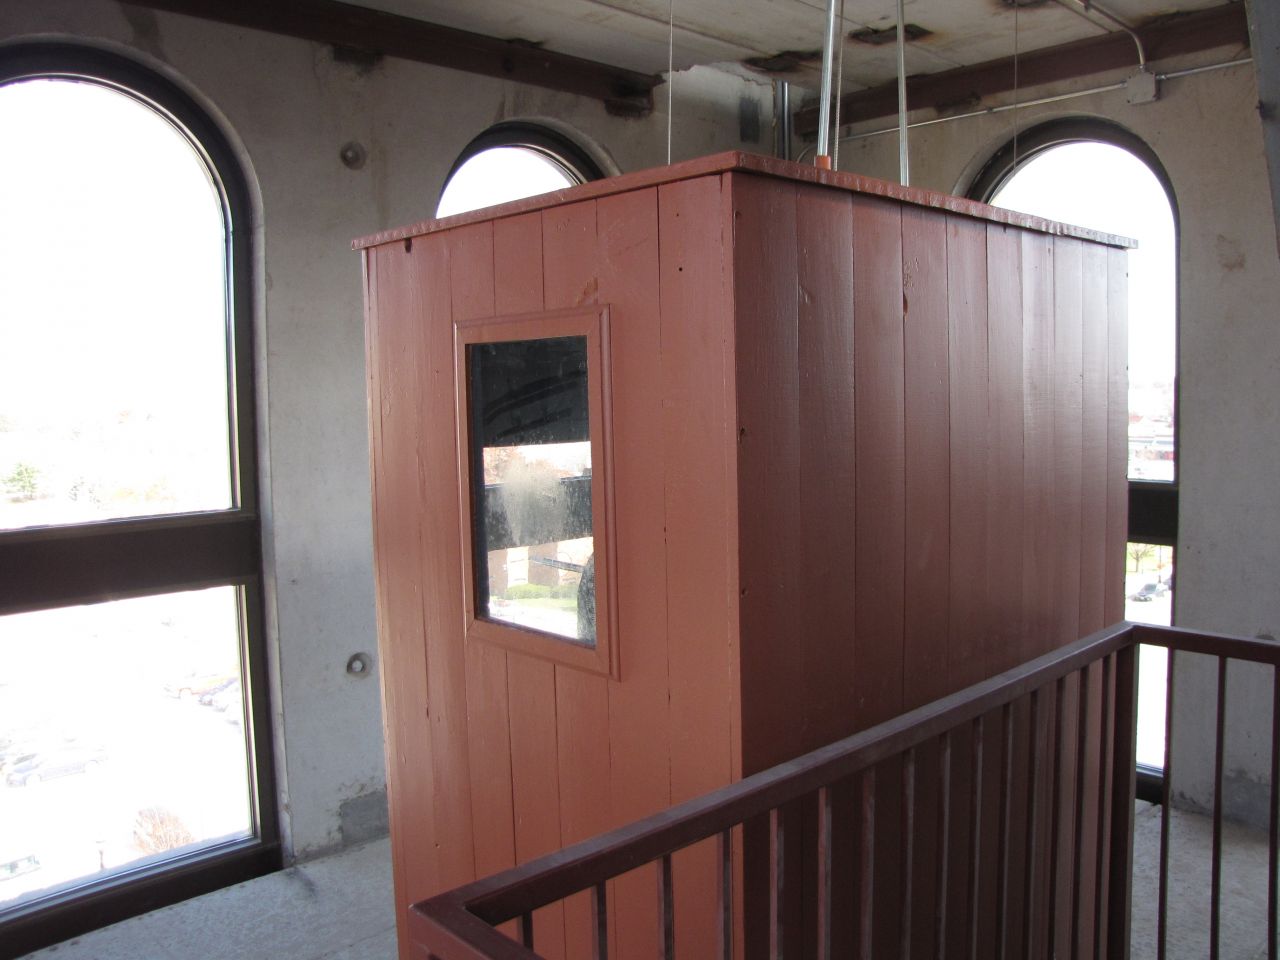 Restored housing for the mechanicals for the clocktower bell